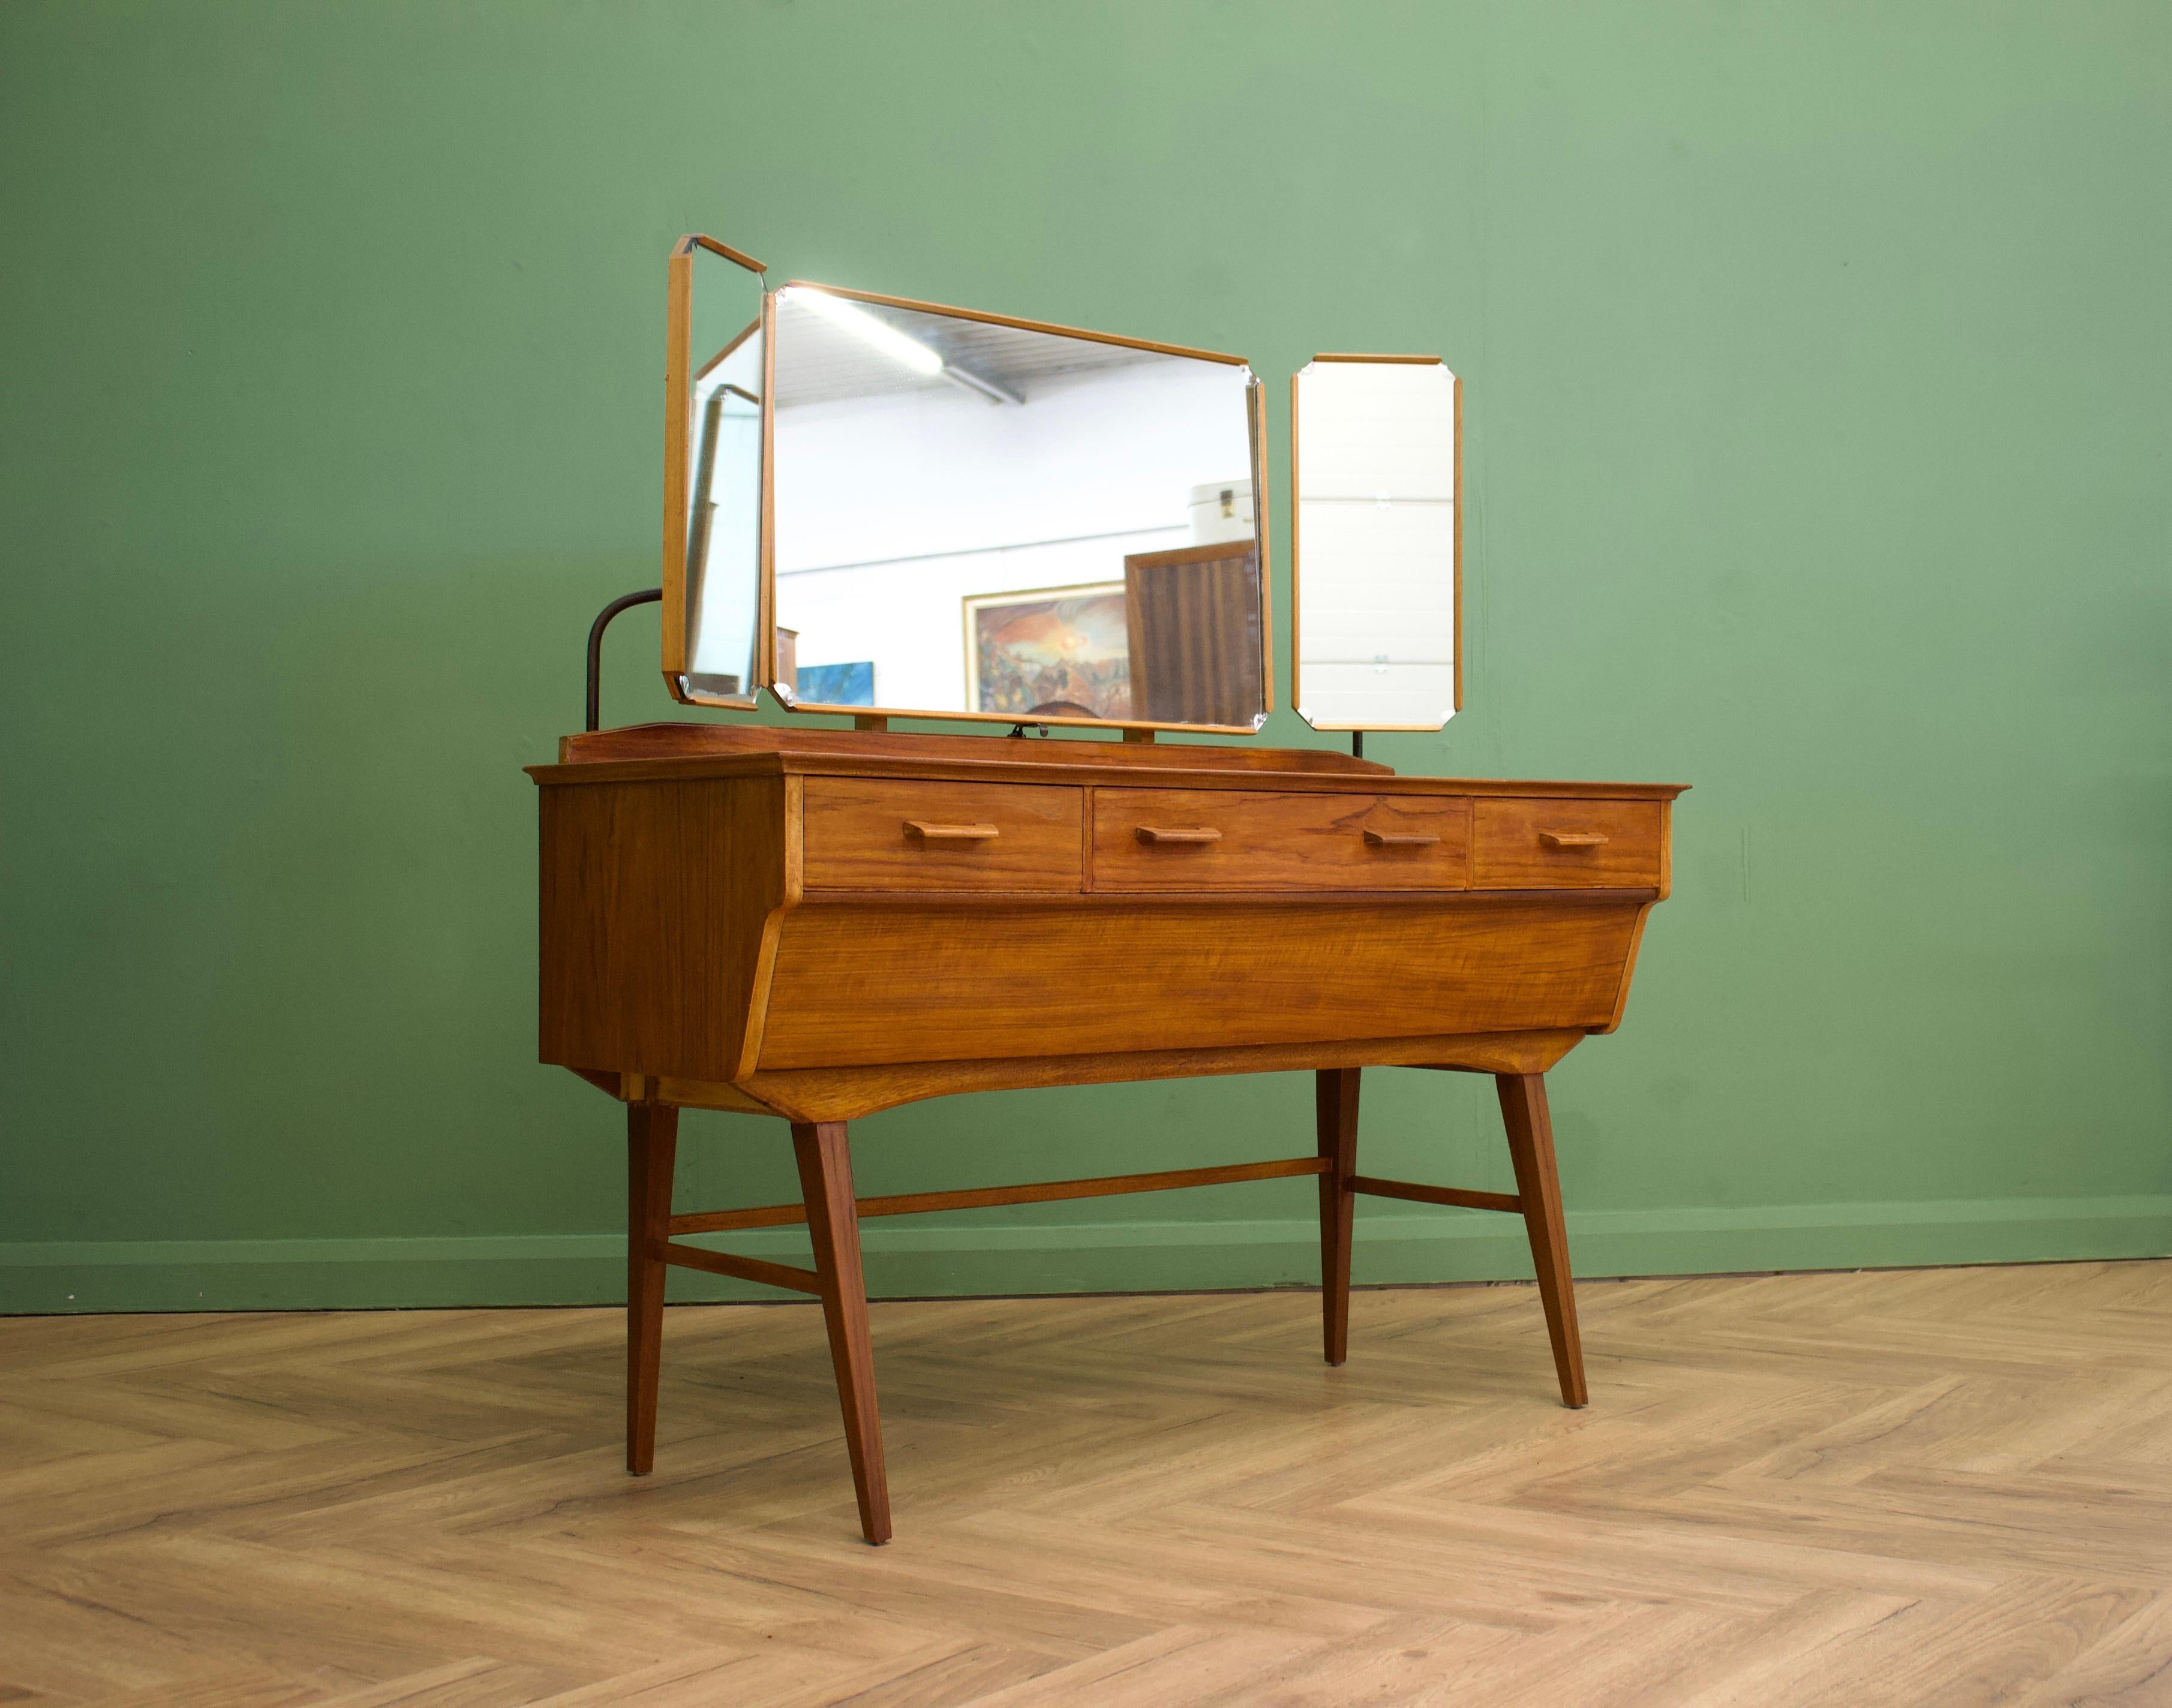 - Mid-century dressing table by Alfred Cox.
- Manufactured in the UK.

- Made from walnut & walnut Veneer.

- Featuring 5 drawers and a triptych mirror.